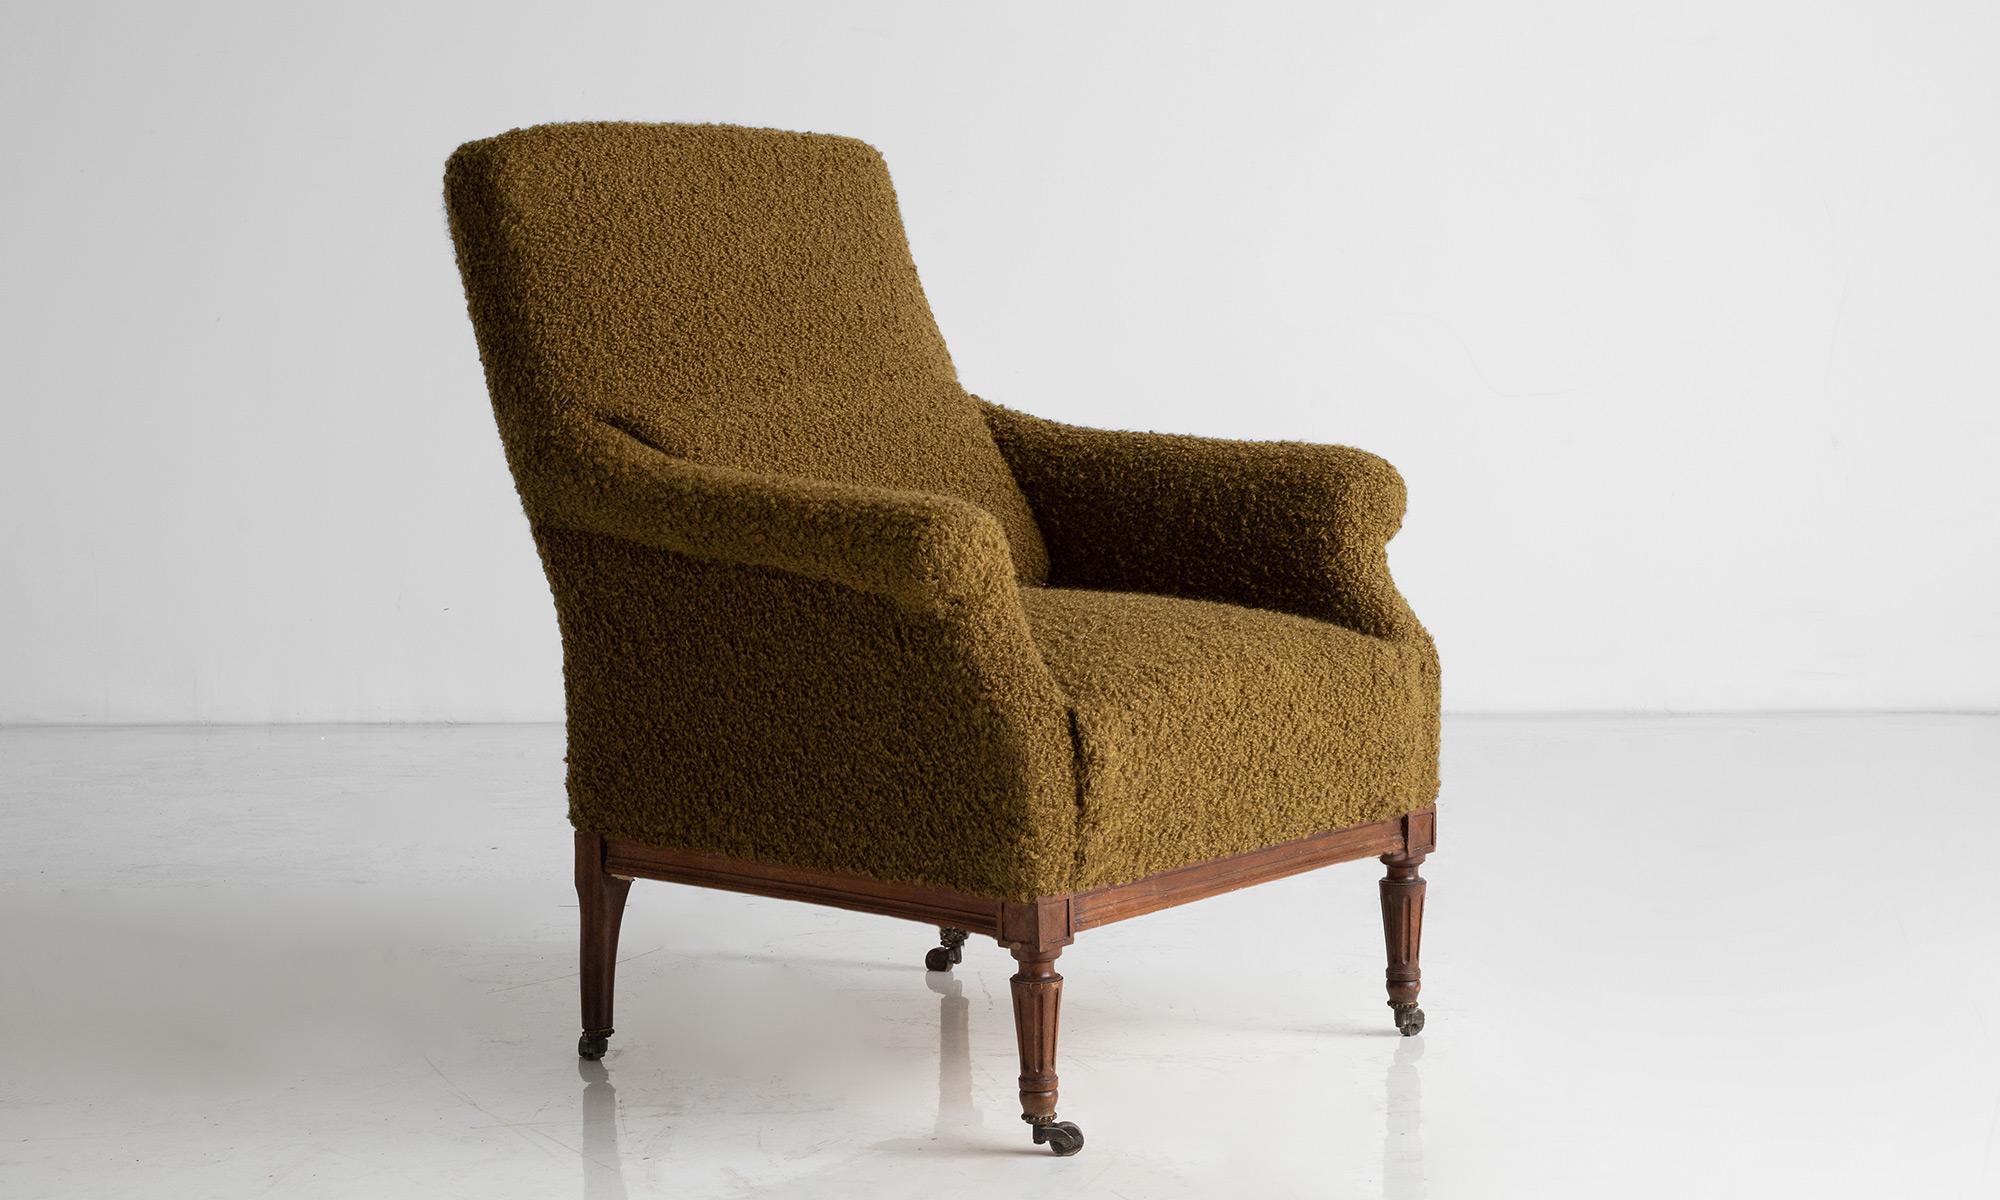 Convertible Chair-Lounge in Boucle by Pierre Frey

France circa 1880

Newly upholstered, with rare design featuring hideaway footrest.

Measures: 30.25”L x 36”d / 57”d x 37.5”h x 18”seat.